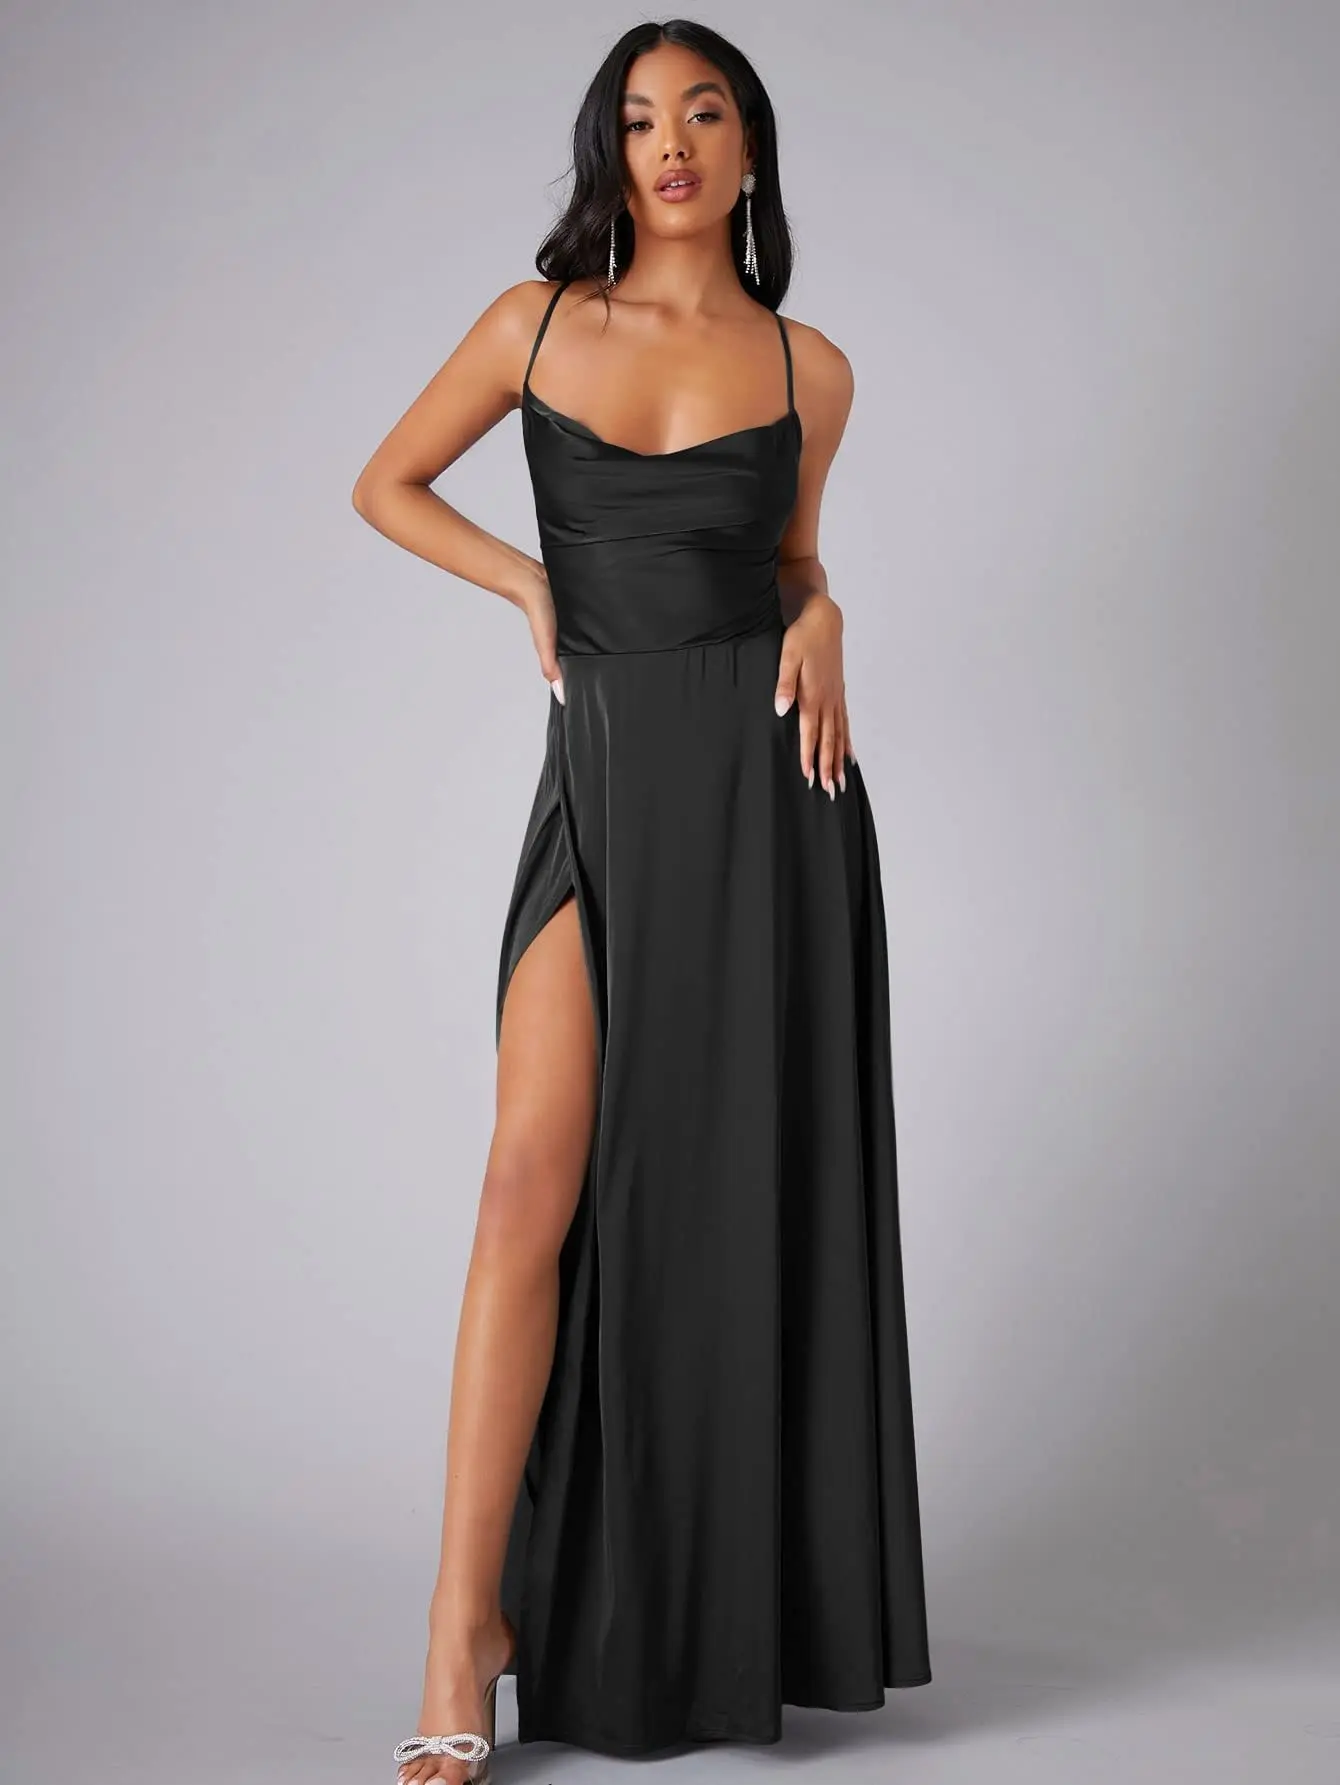 

WYWMY Sexy Summer Women Long Party Dress Solid Color Slim One Line Neck Backless Strap Dress Waist Wrap Sleeveless Maxi Dresses